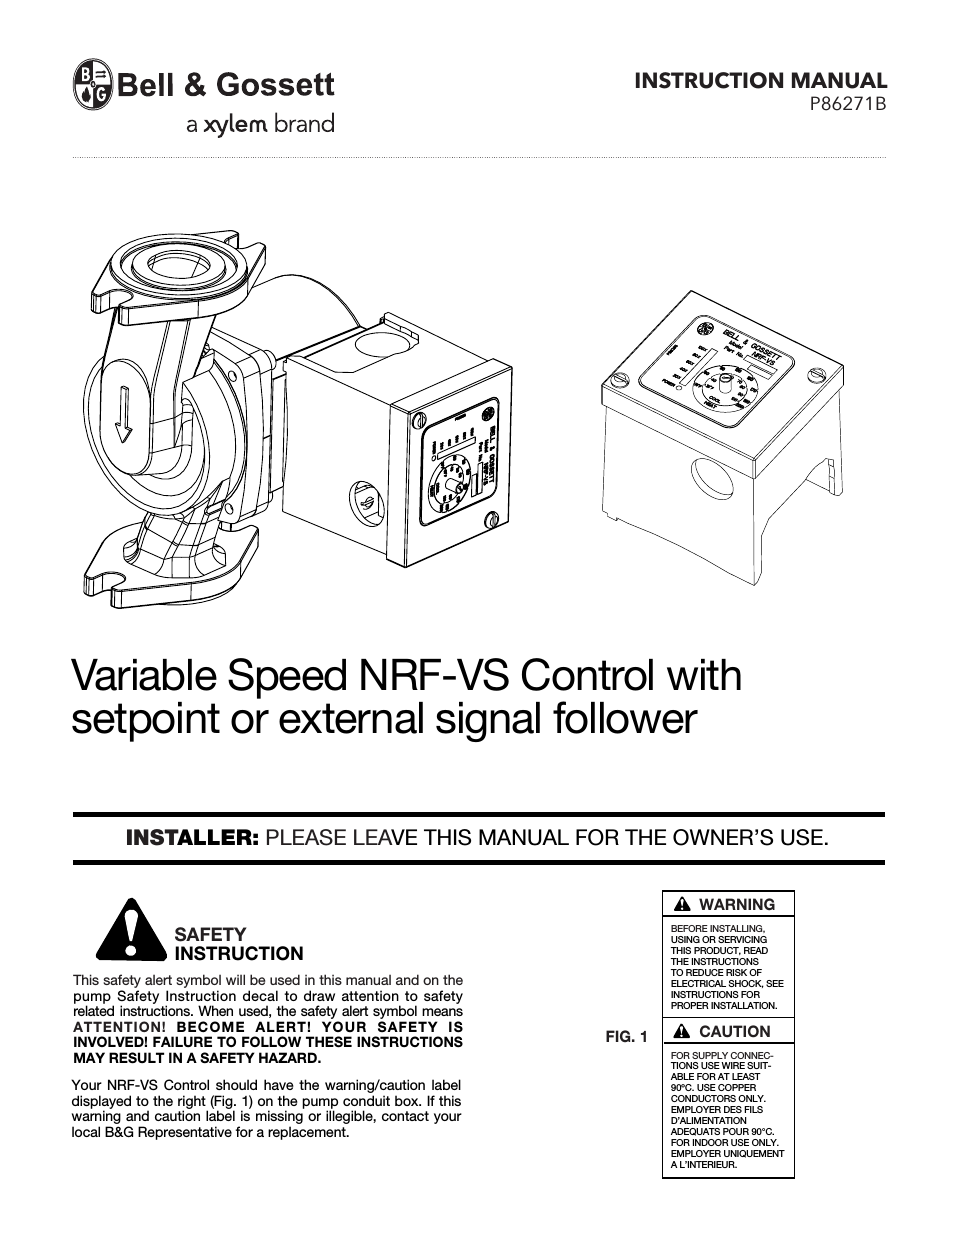 P86271B Variable Speed NRF-VS Control with setpoint or external signal follower